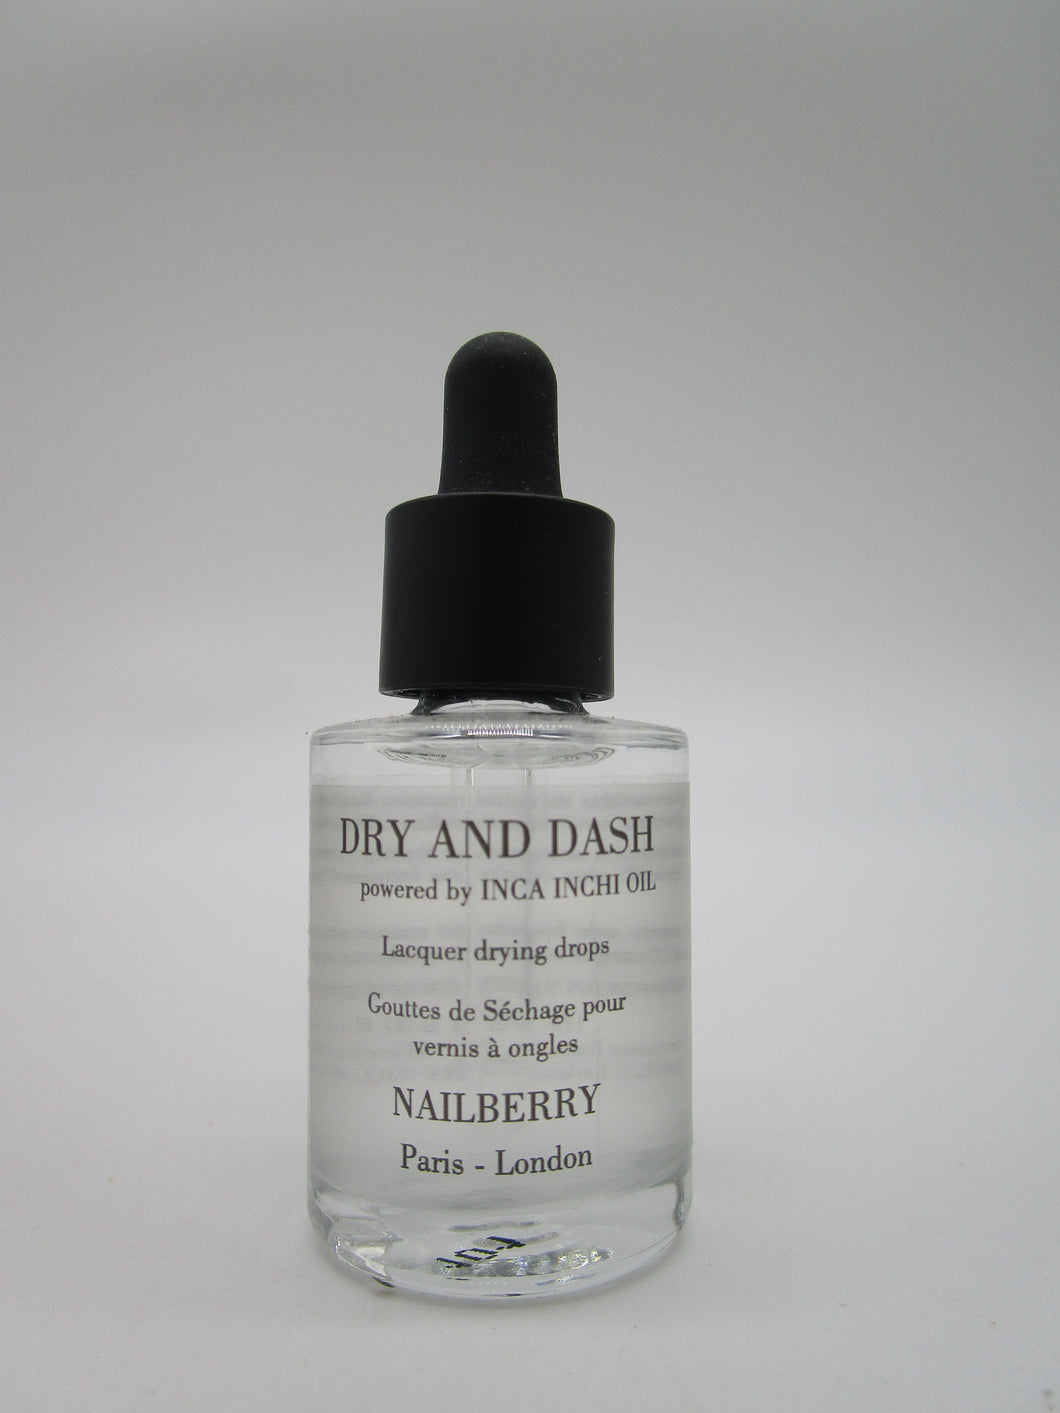 Nailberry Dry & Dash Lacquer drying drops